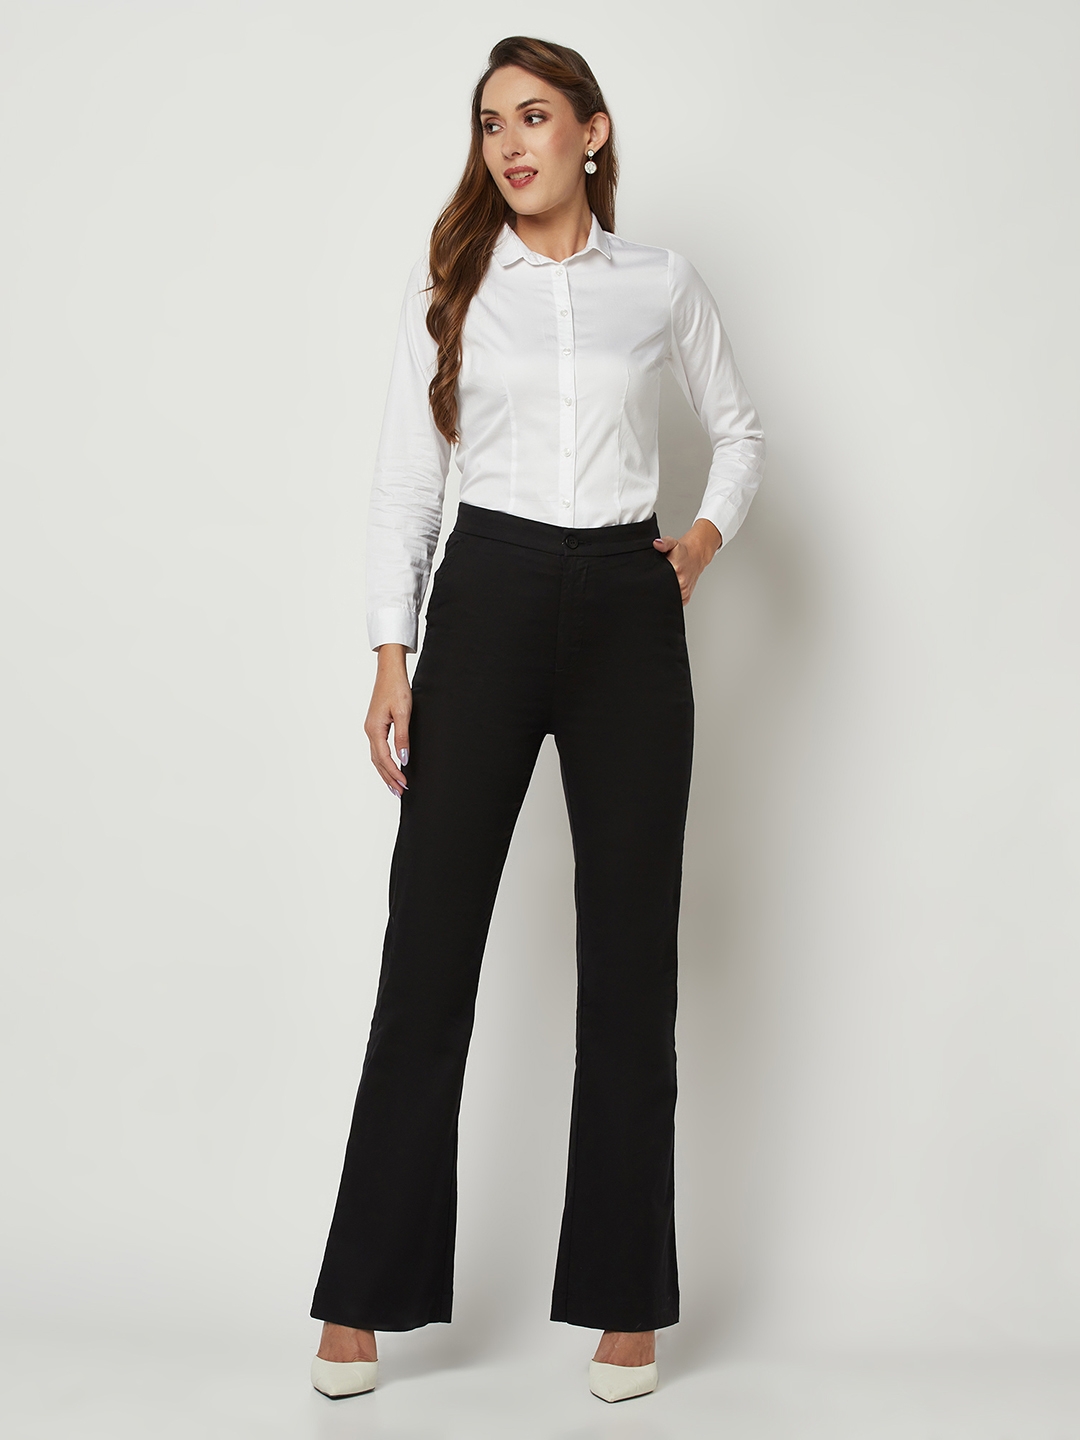 Buy Flared Bootcut TROUSERS, White PANTS, Flared Pants, Pants With TRAIN ,  Womens Pants, Aniela Pants Online in India - Etsy